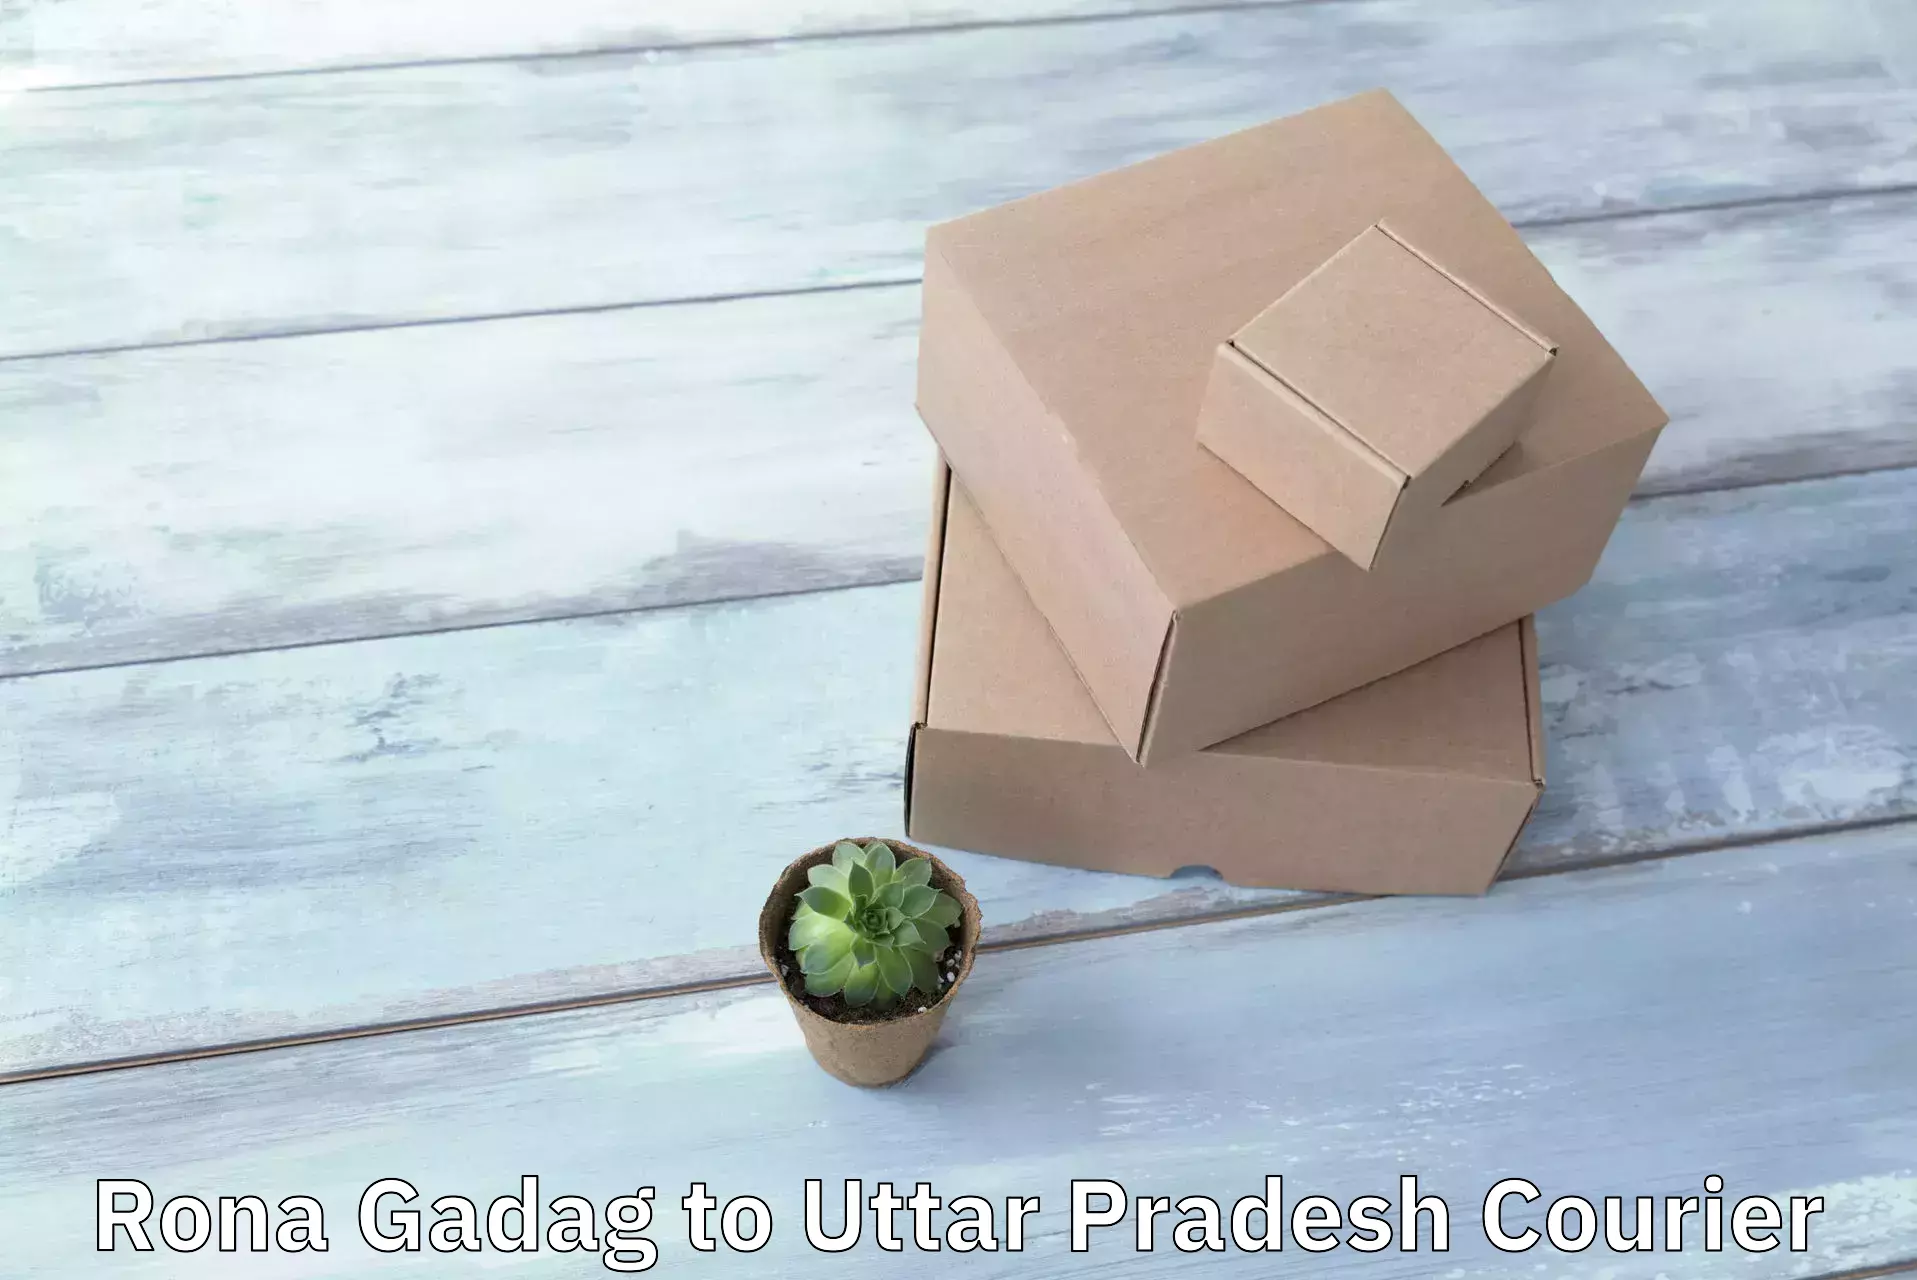 Bulk courier orders Rona Gadag to Fatehabad Agra